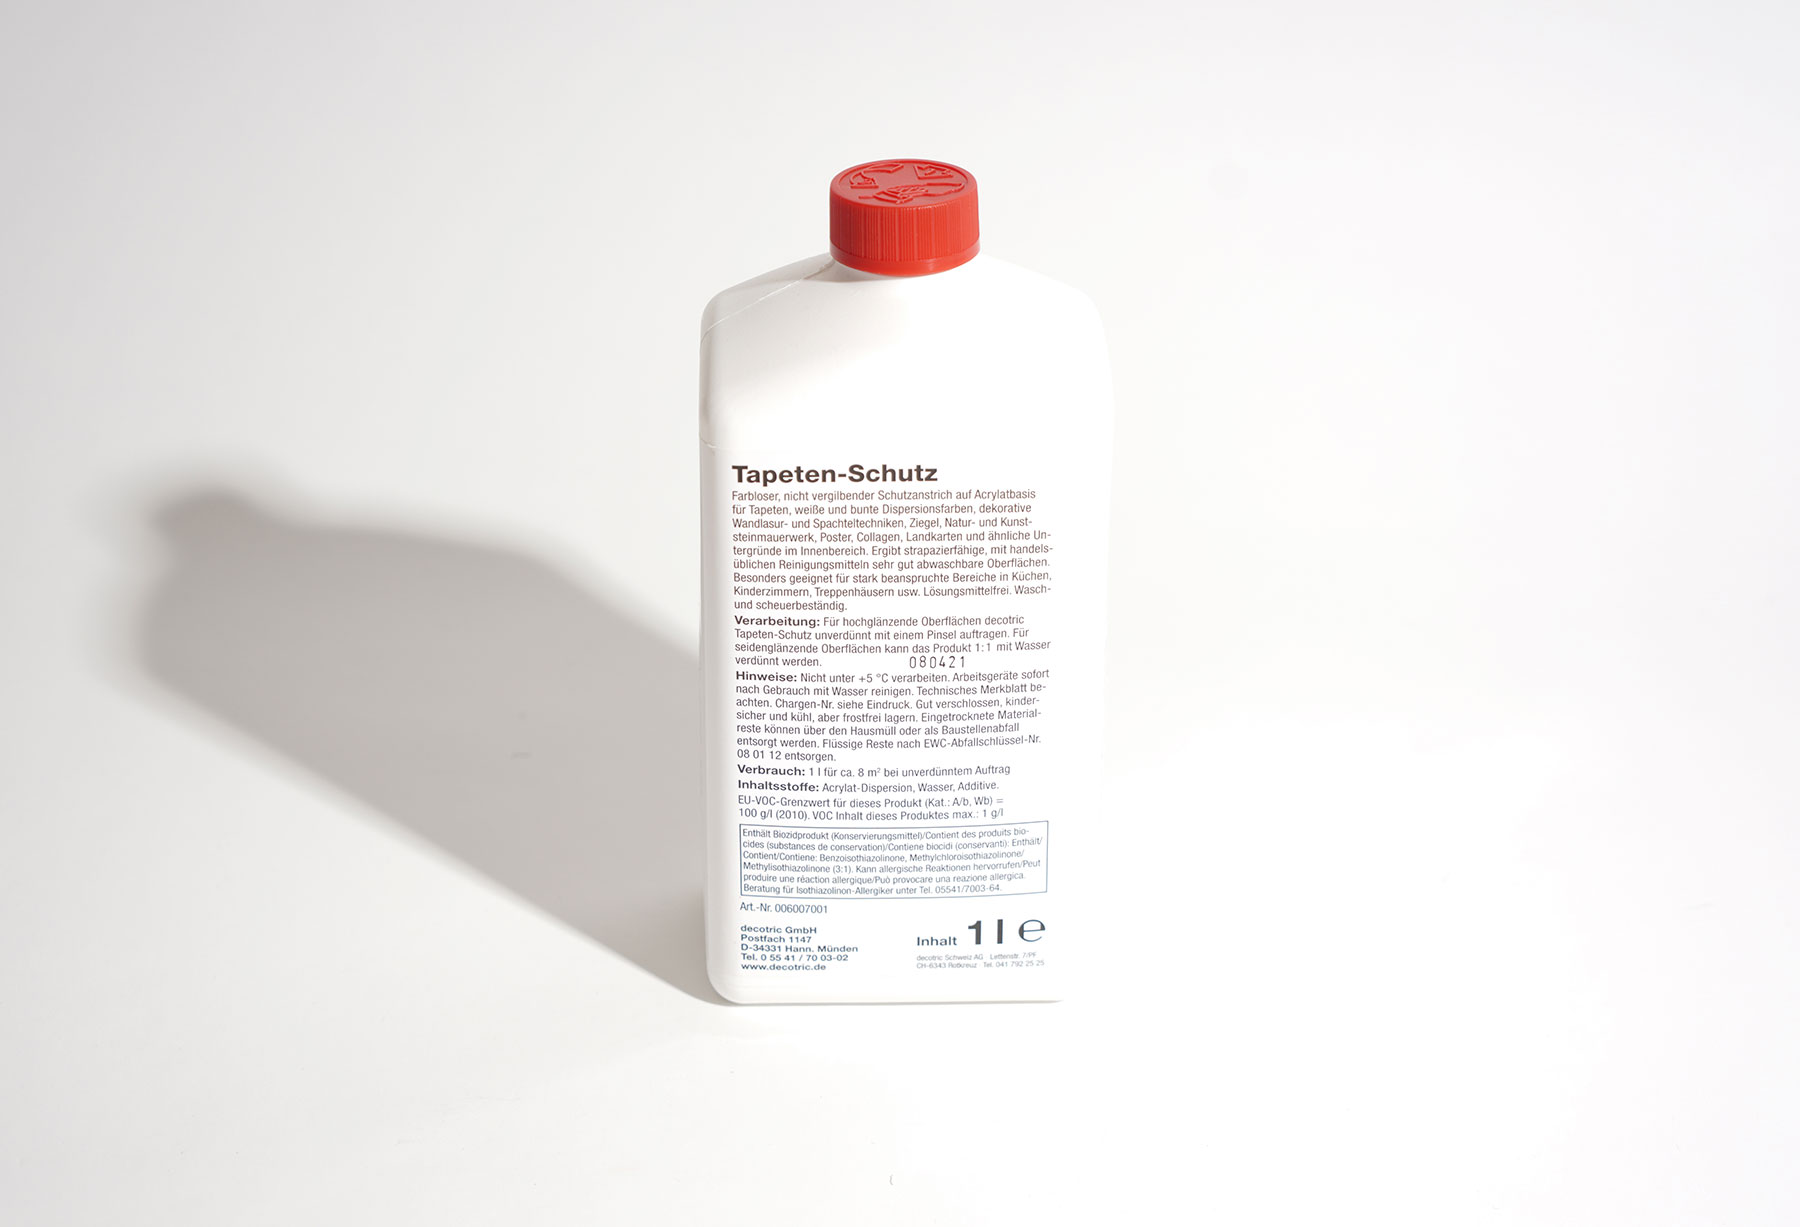             Wallpaper protector 1L, for transparent protective coating
        